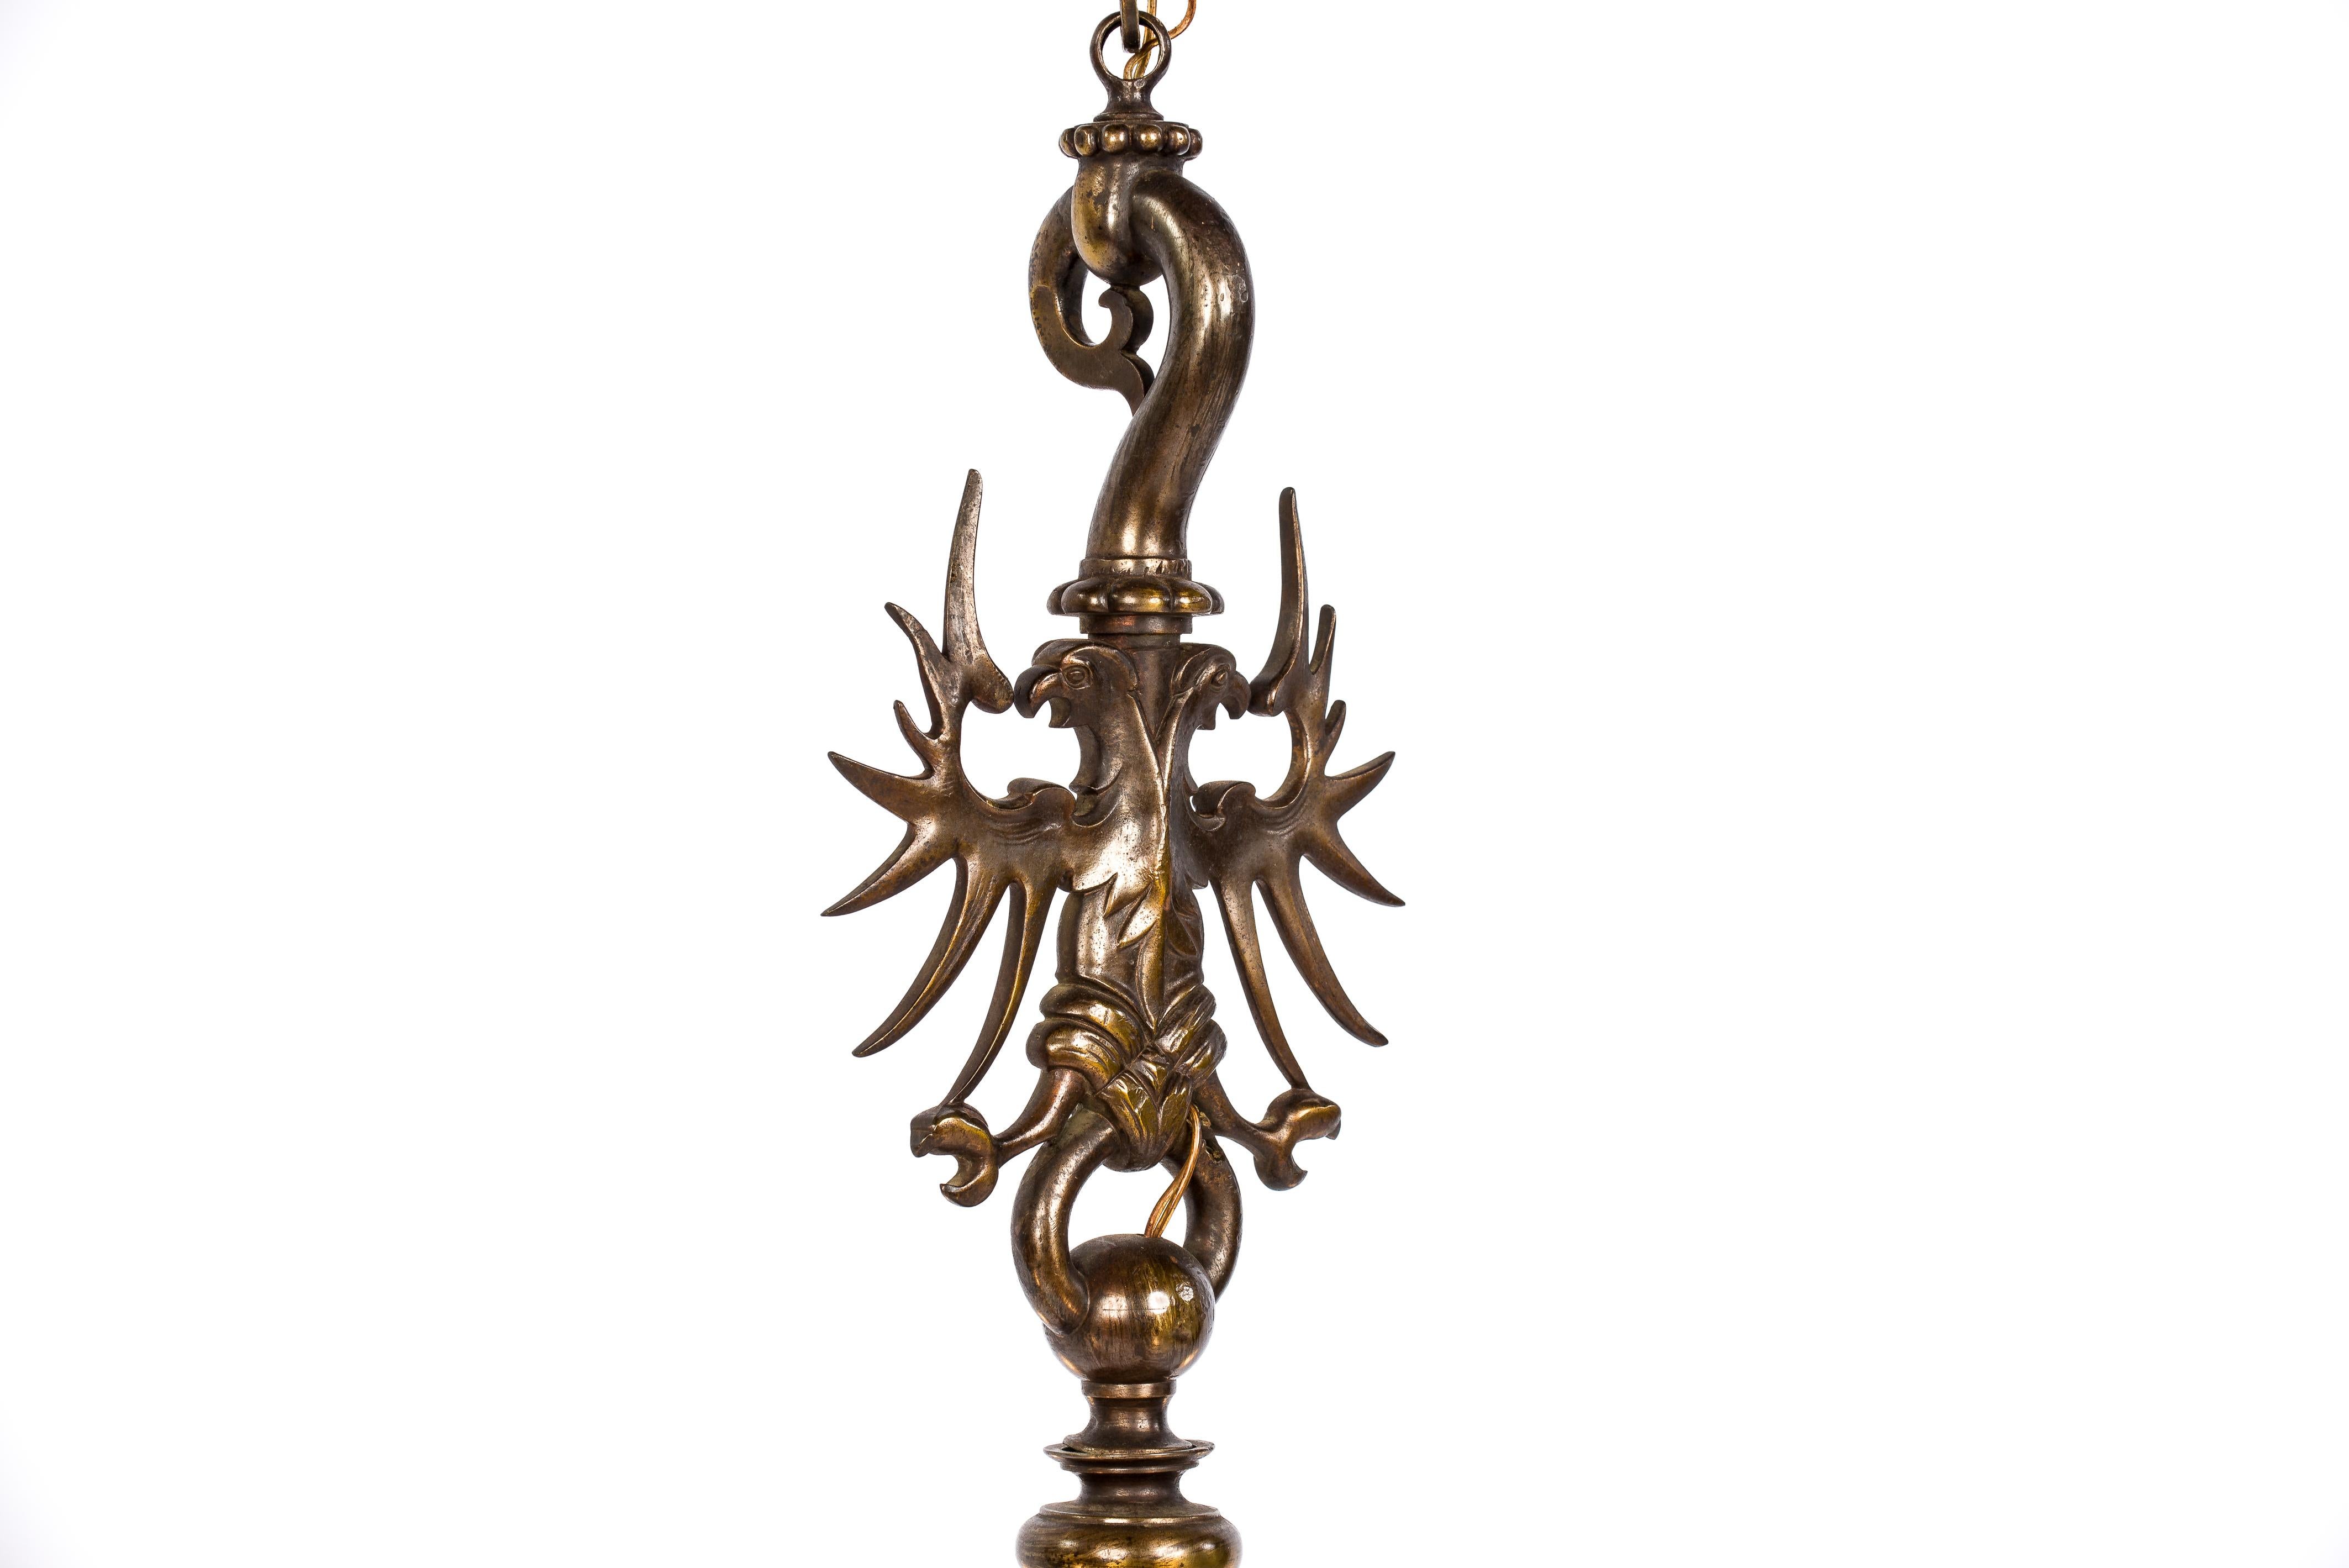 Antique Early 20th-Century Patinated Brass French Chandelier with Torches 1